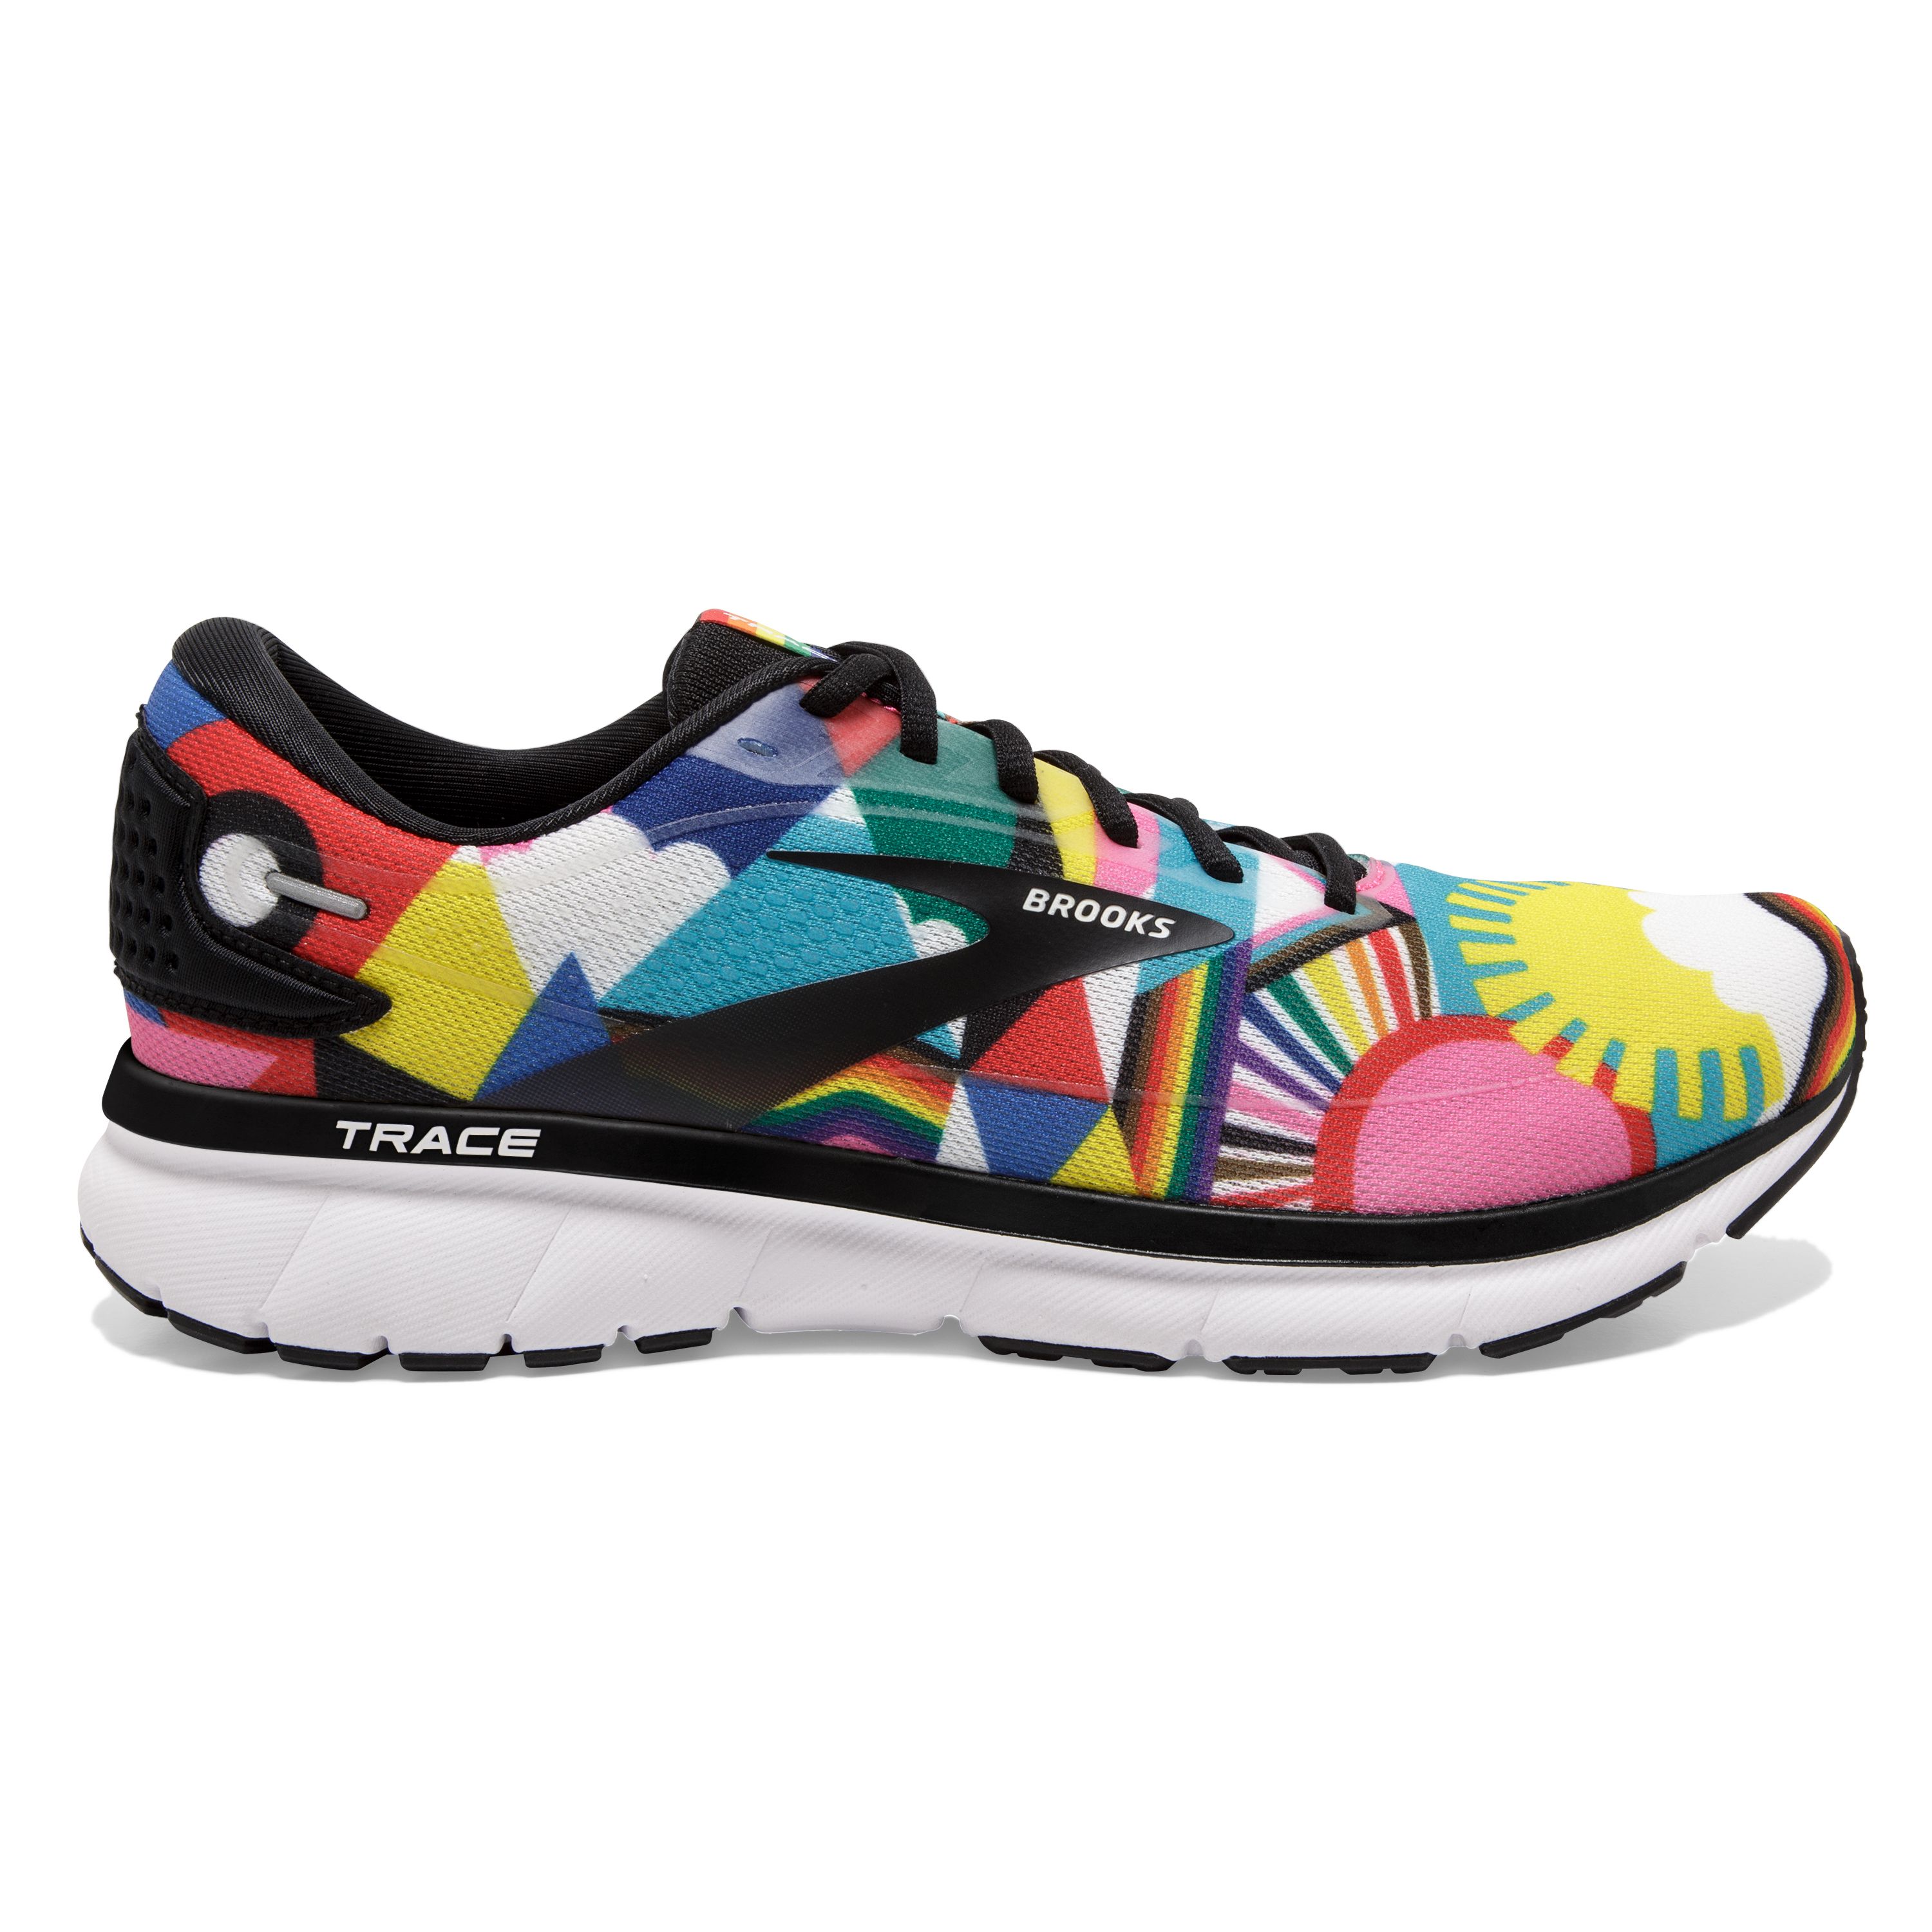 A colorful running shoe